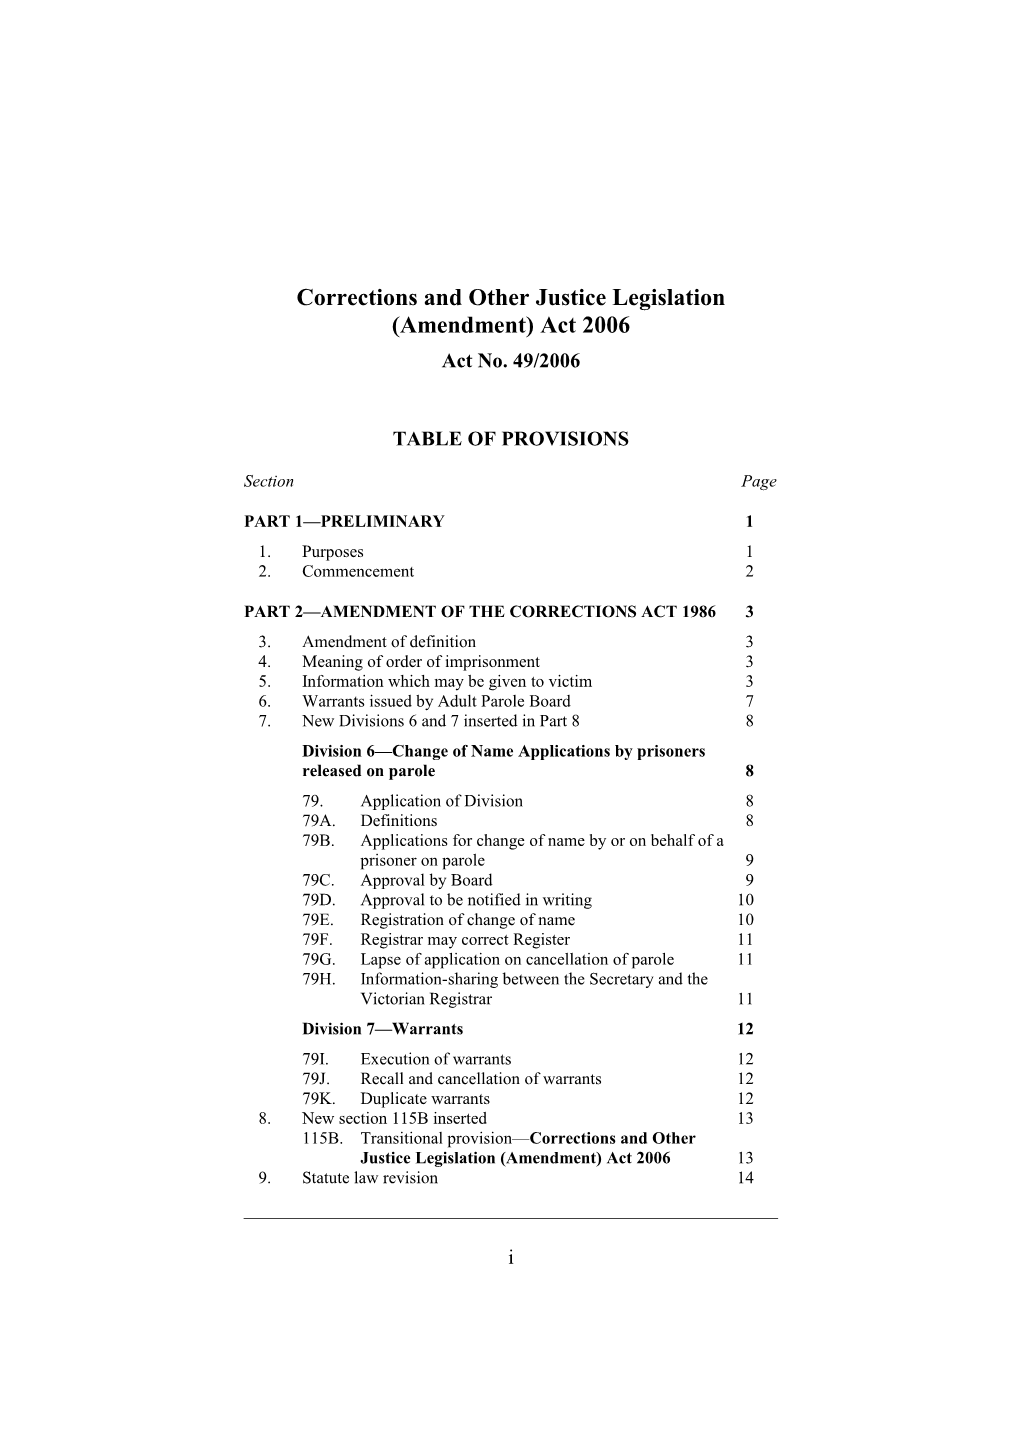 Corrections and Other Justice Legislation (Amendment) Act 2006